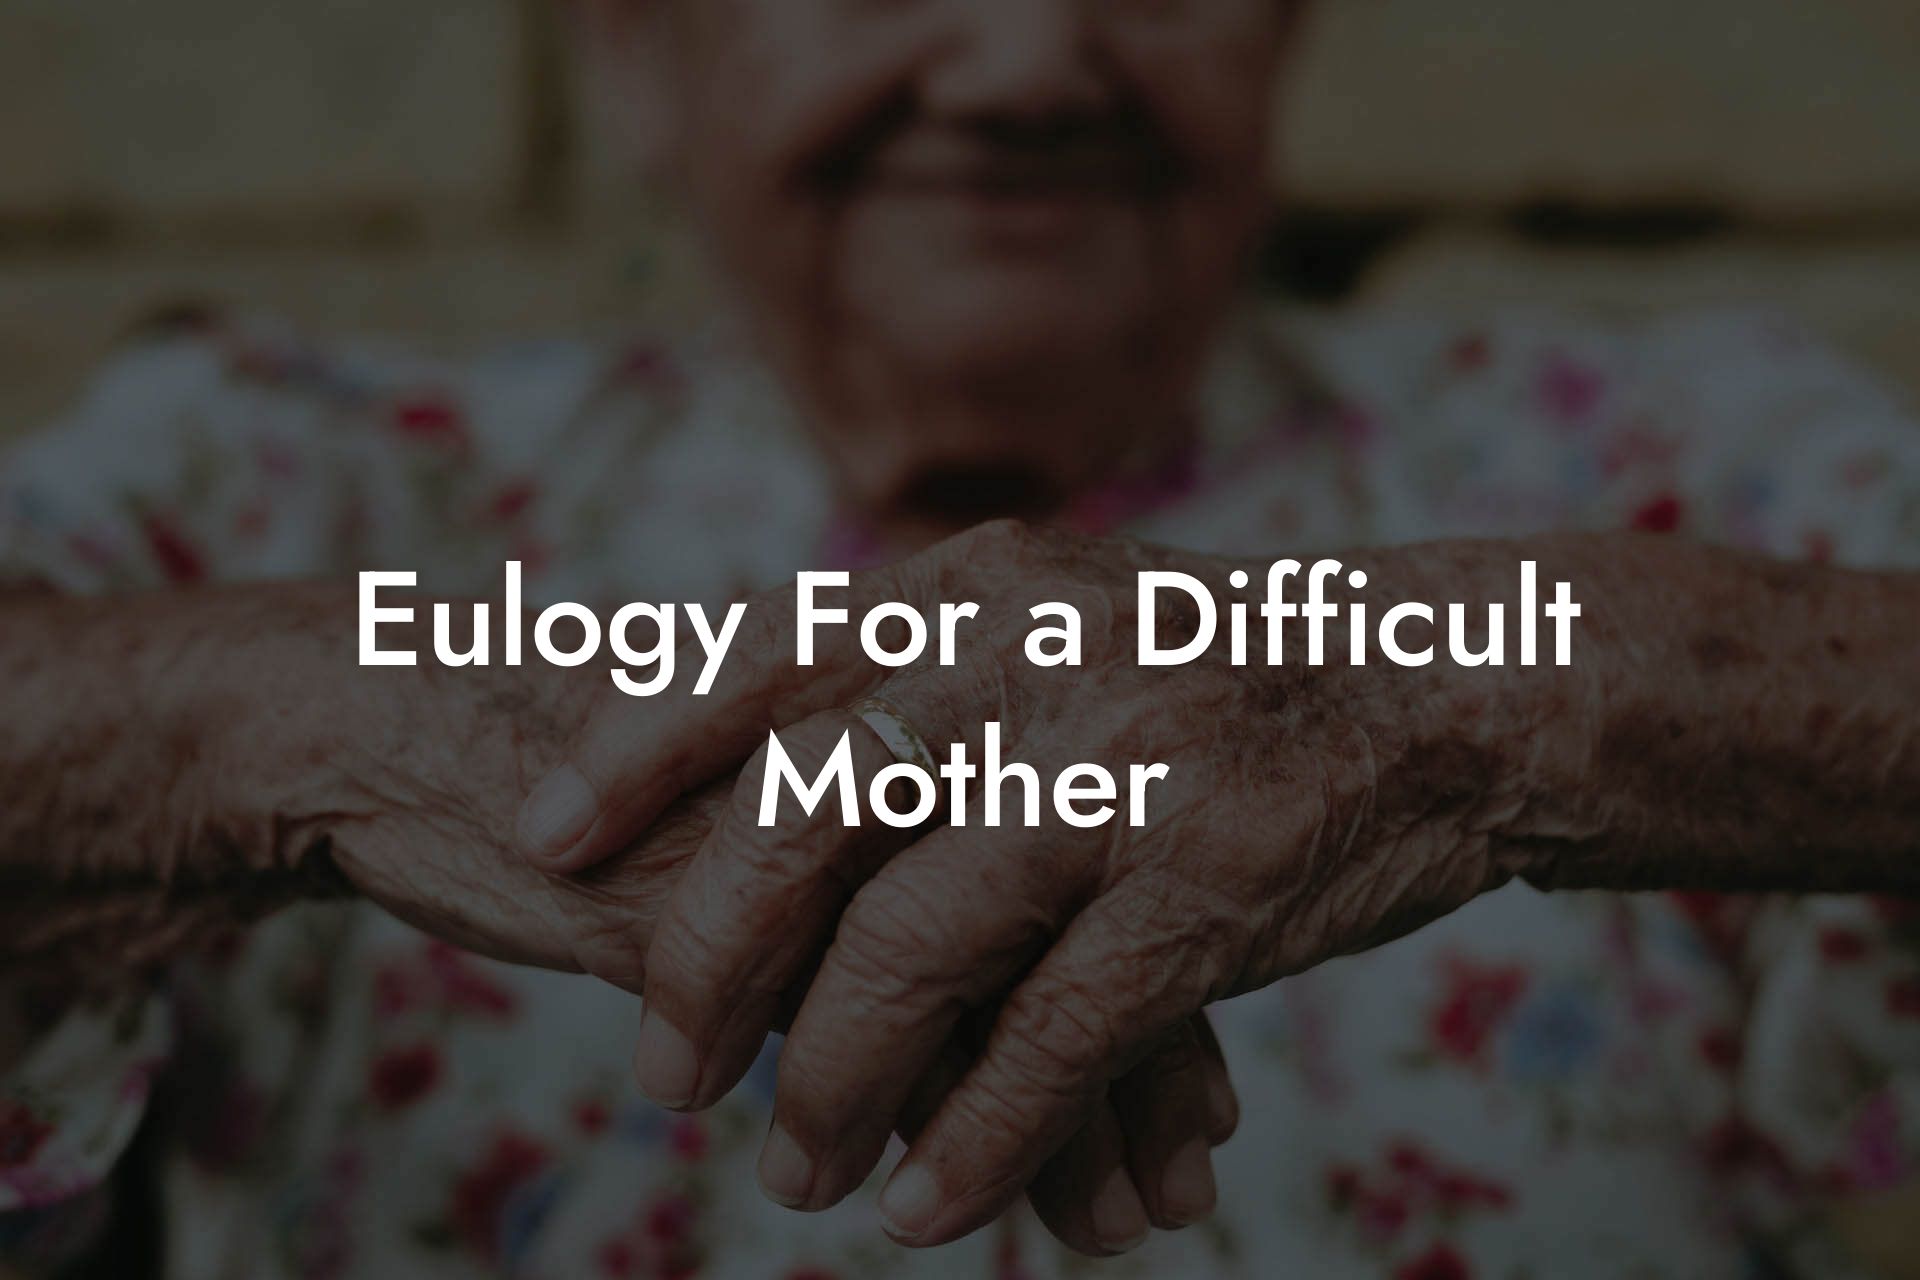 Eulogy For a Difficult Mother